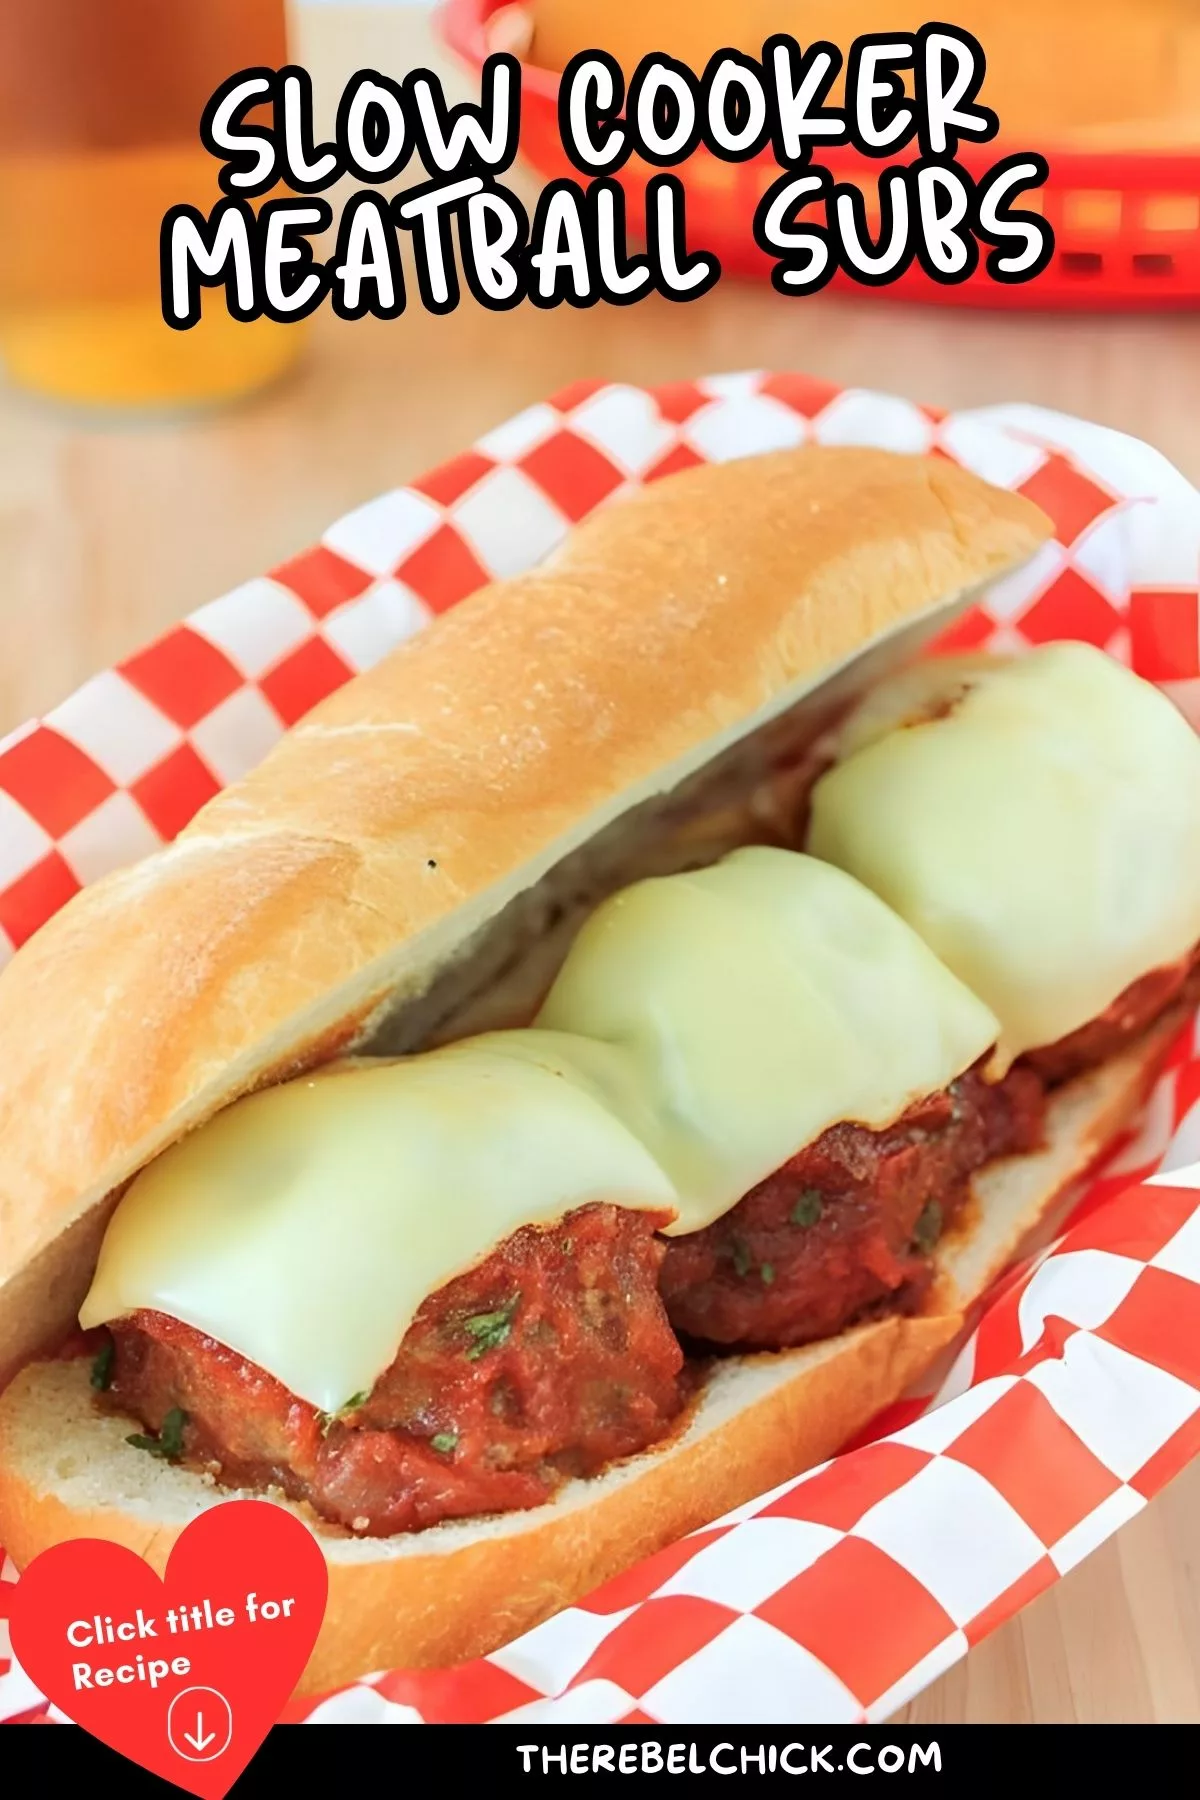 Slow Cooker Meatball Subs Recipe